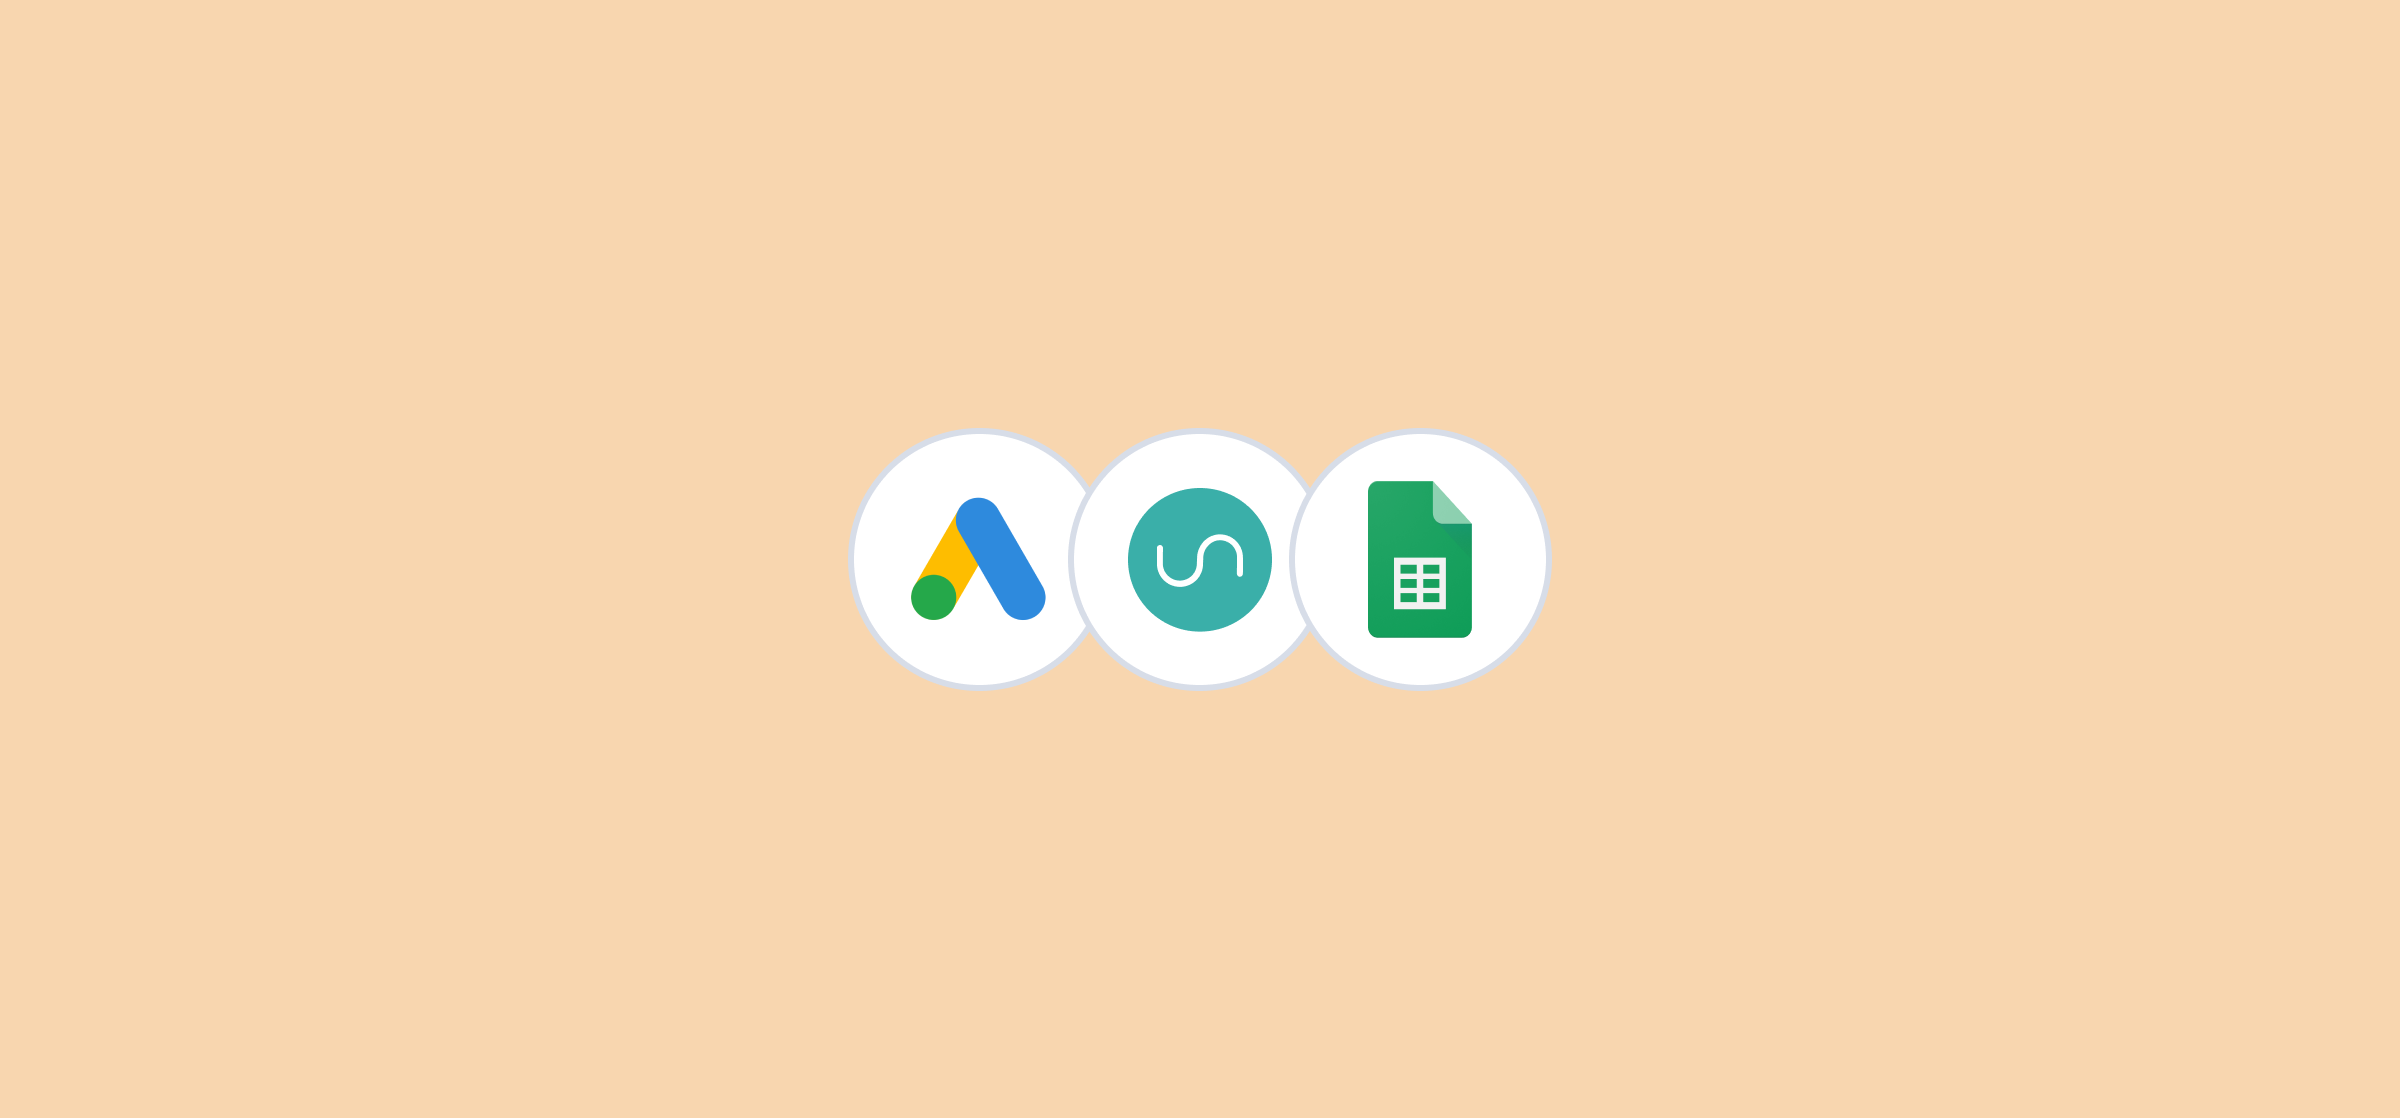 Logos for Unito, Google Sheets, and Google Ads, representing a Google Ads performance report template.